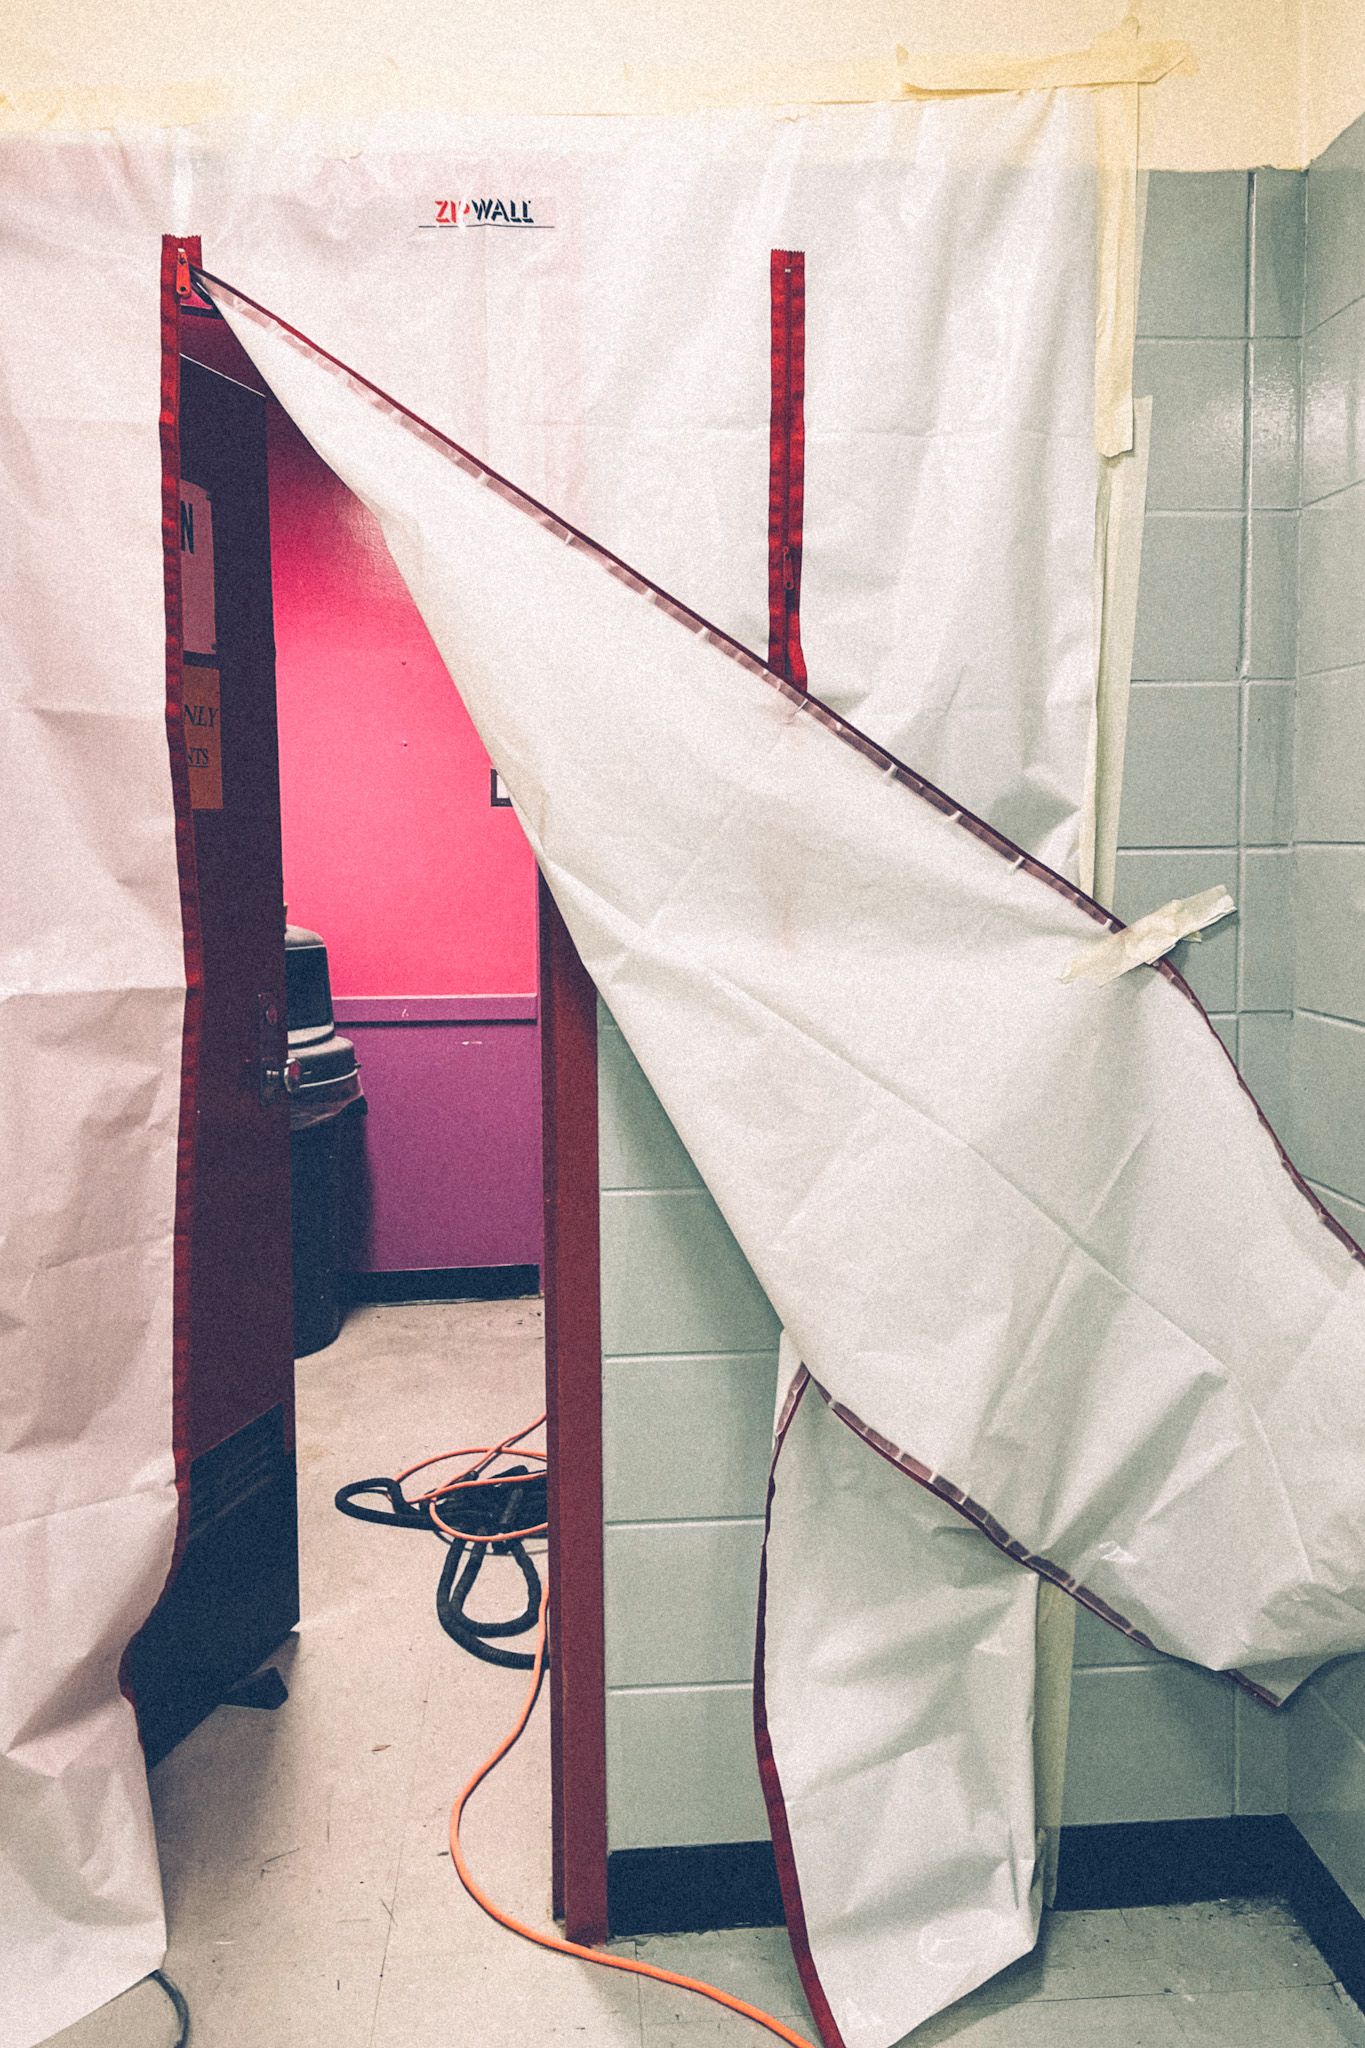 Clear construction tarp is taped across a doorway in a school, revealing a pink and purple wall in the back room.